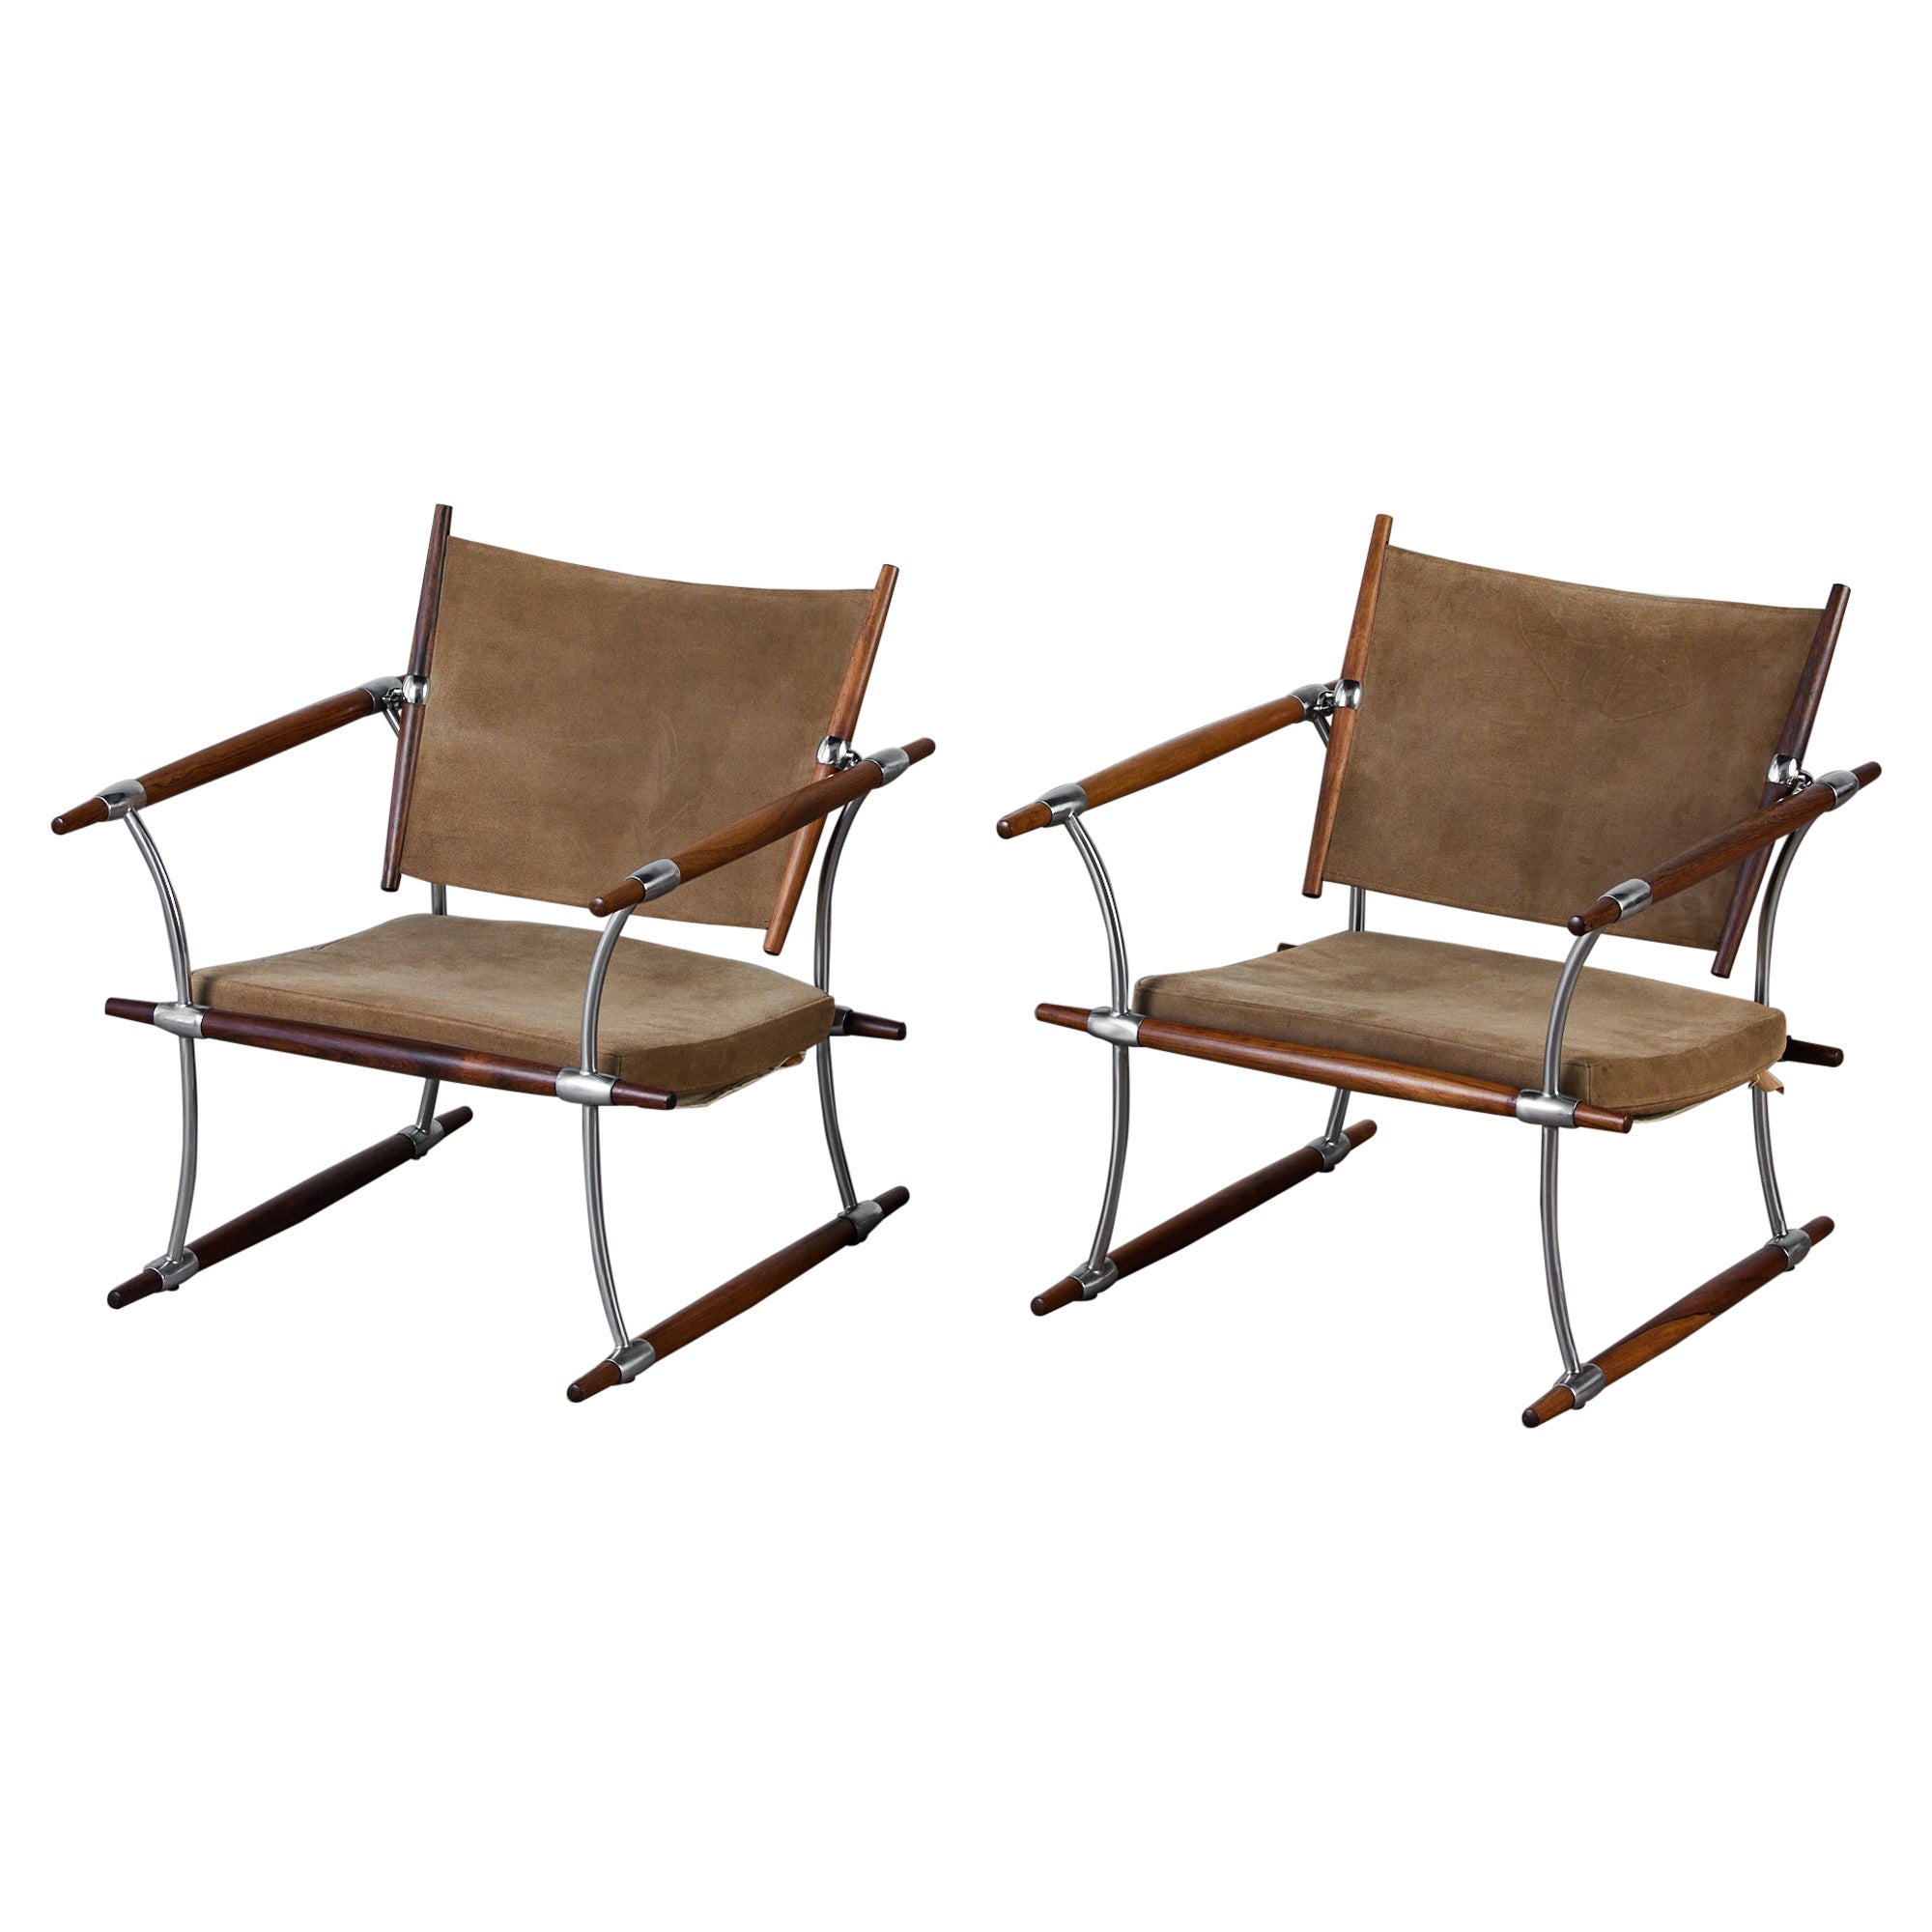 Pair of Jens H. Quistgaard Suede and Rosewood 'Stokke' Lounge Chair